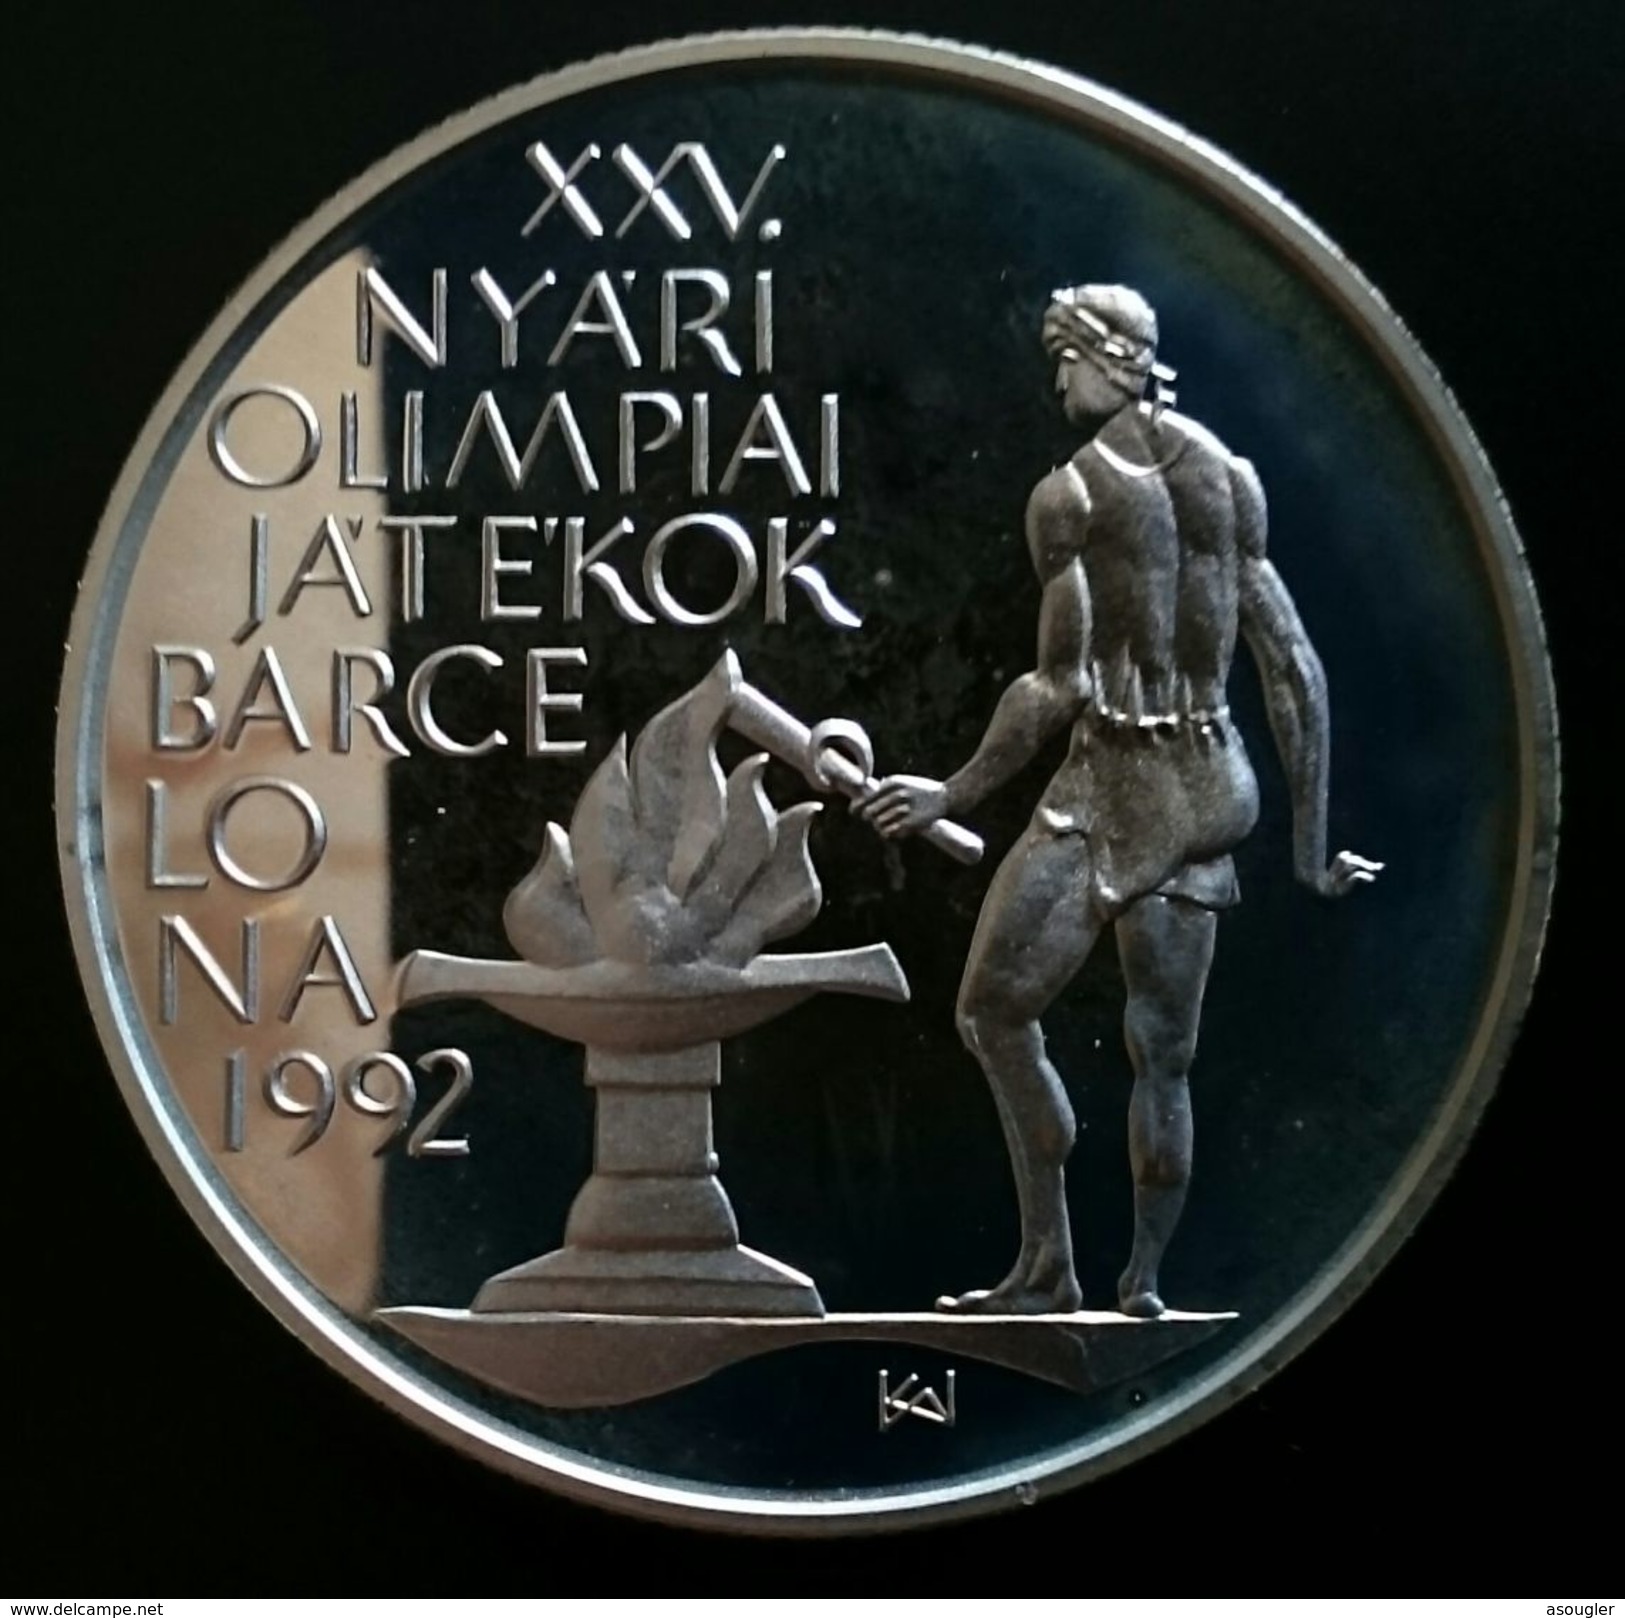 HUNGARY 500 FORINT 1989 SILVER PROOF "OLYMPIC GAMES 1992" Free Shipping Via Registered Air Mail - Ungheria